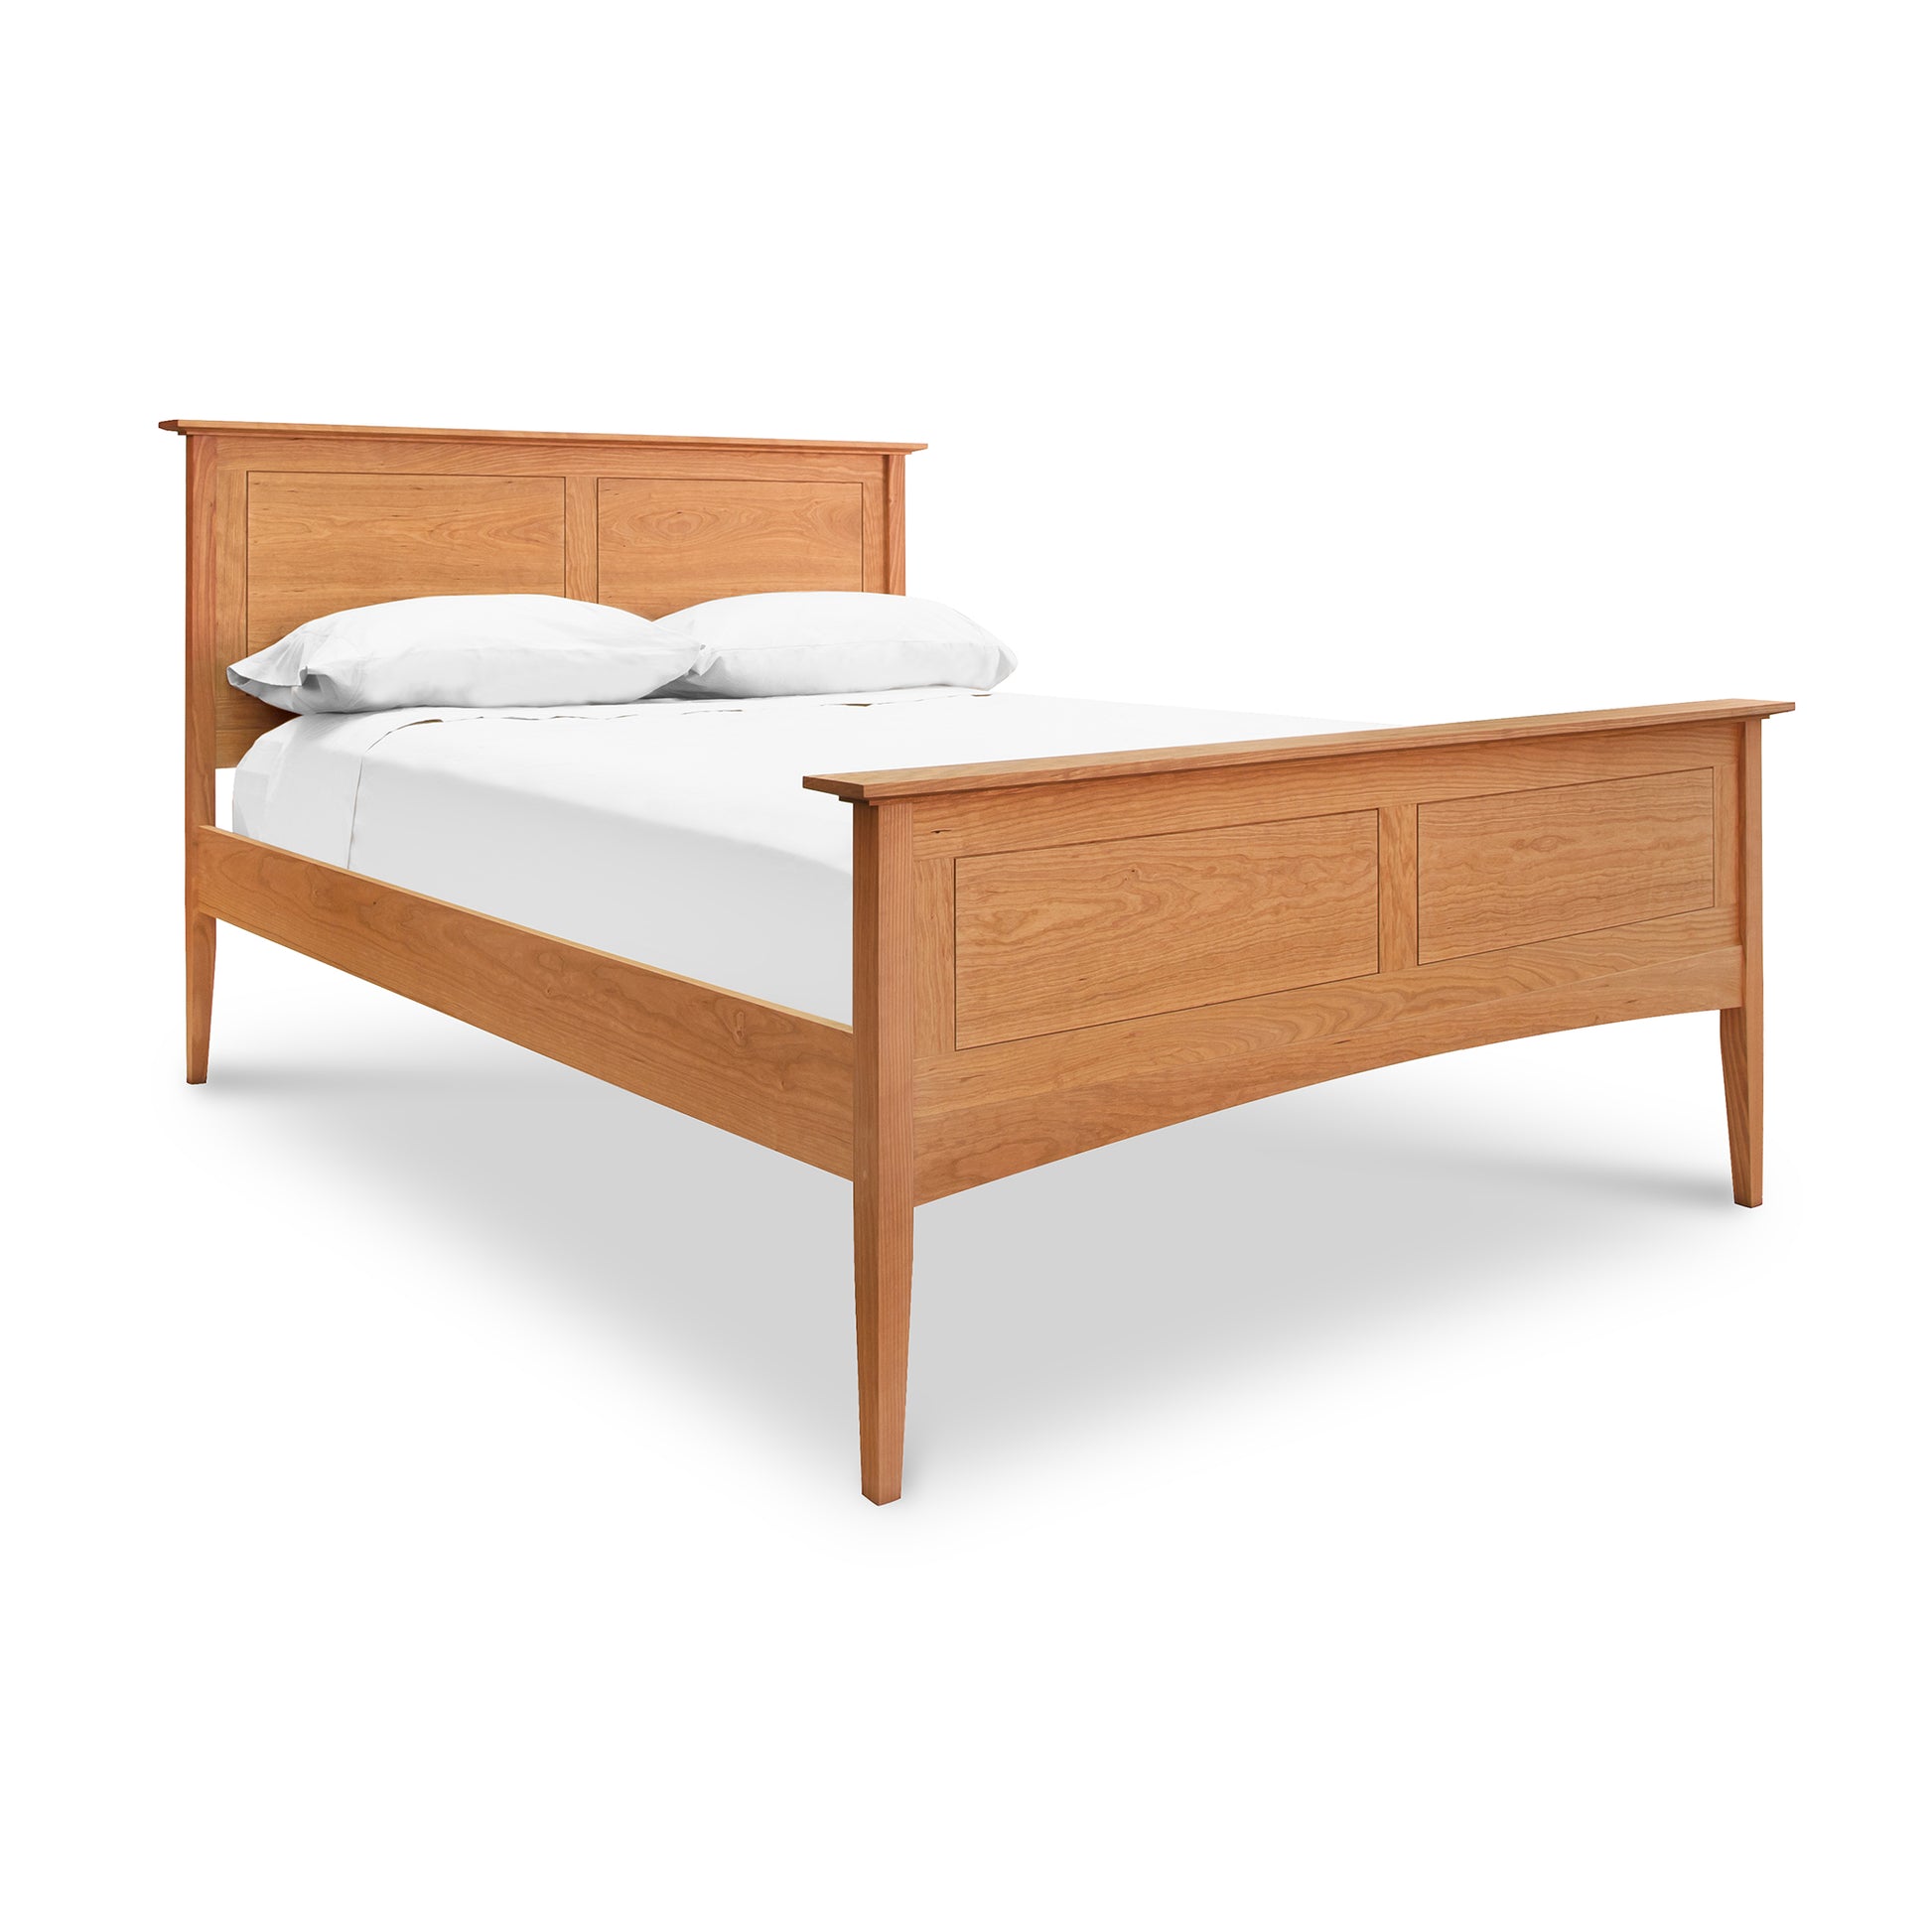 A Maple Corner Woodworks American Shaker Panel Bed with a high headboard, featuring white bedding on a mattress. The frame, crafted from sustainably harvested woods, displays simple, elegant carving and stands isolated against a white background.